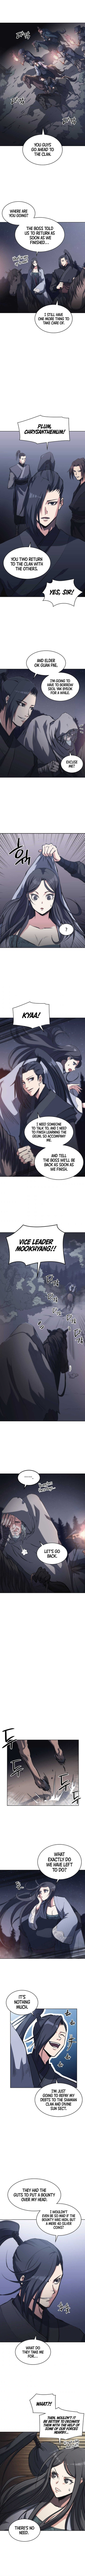 MookHyang - The Origin Chapter 21 page 4